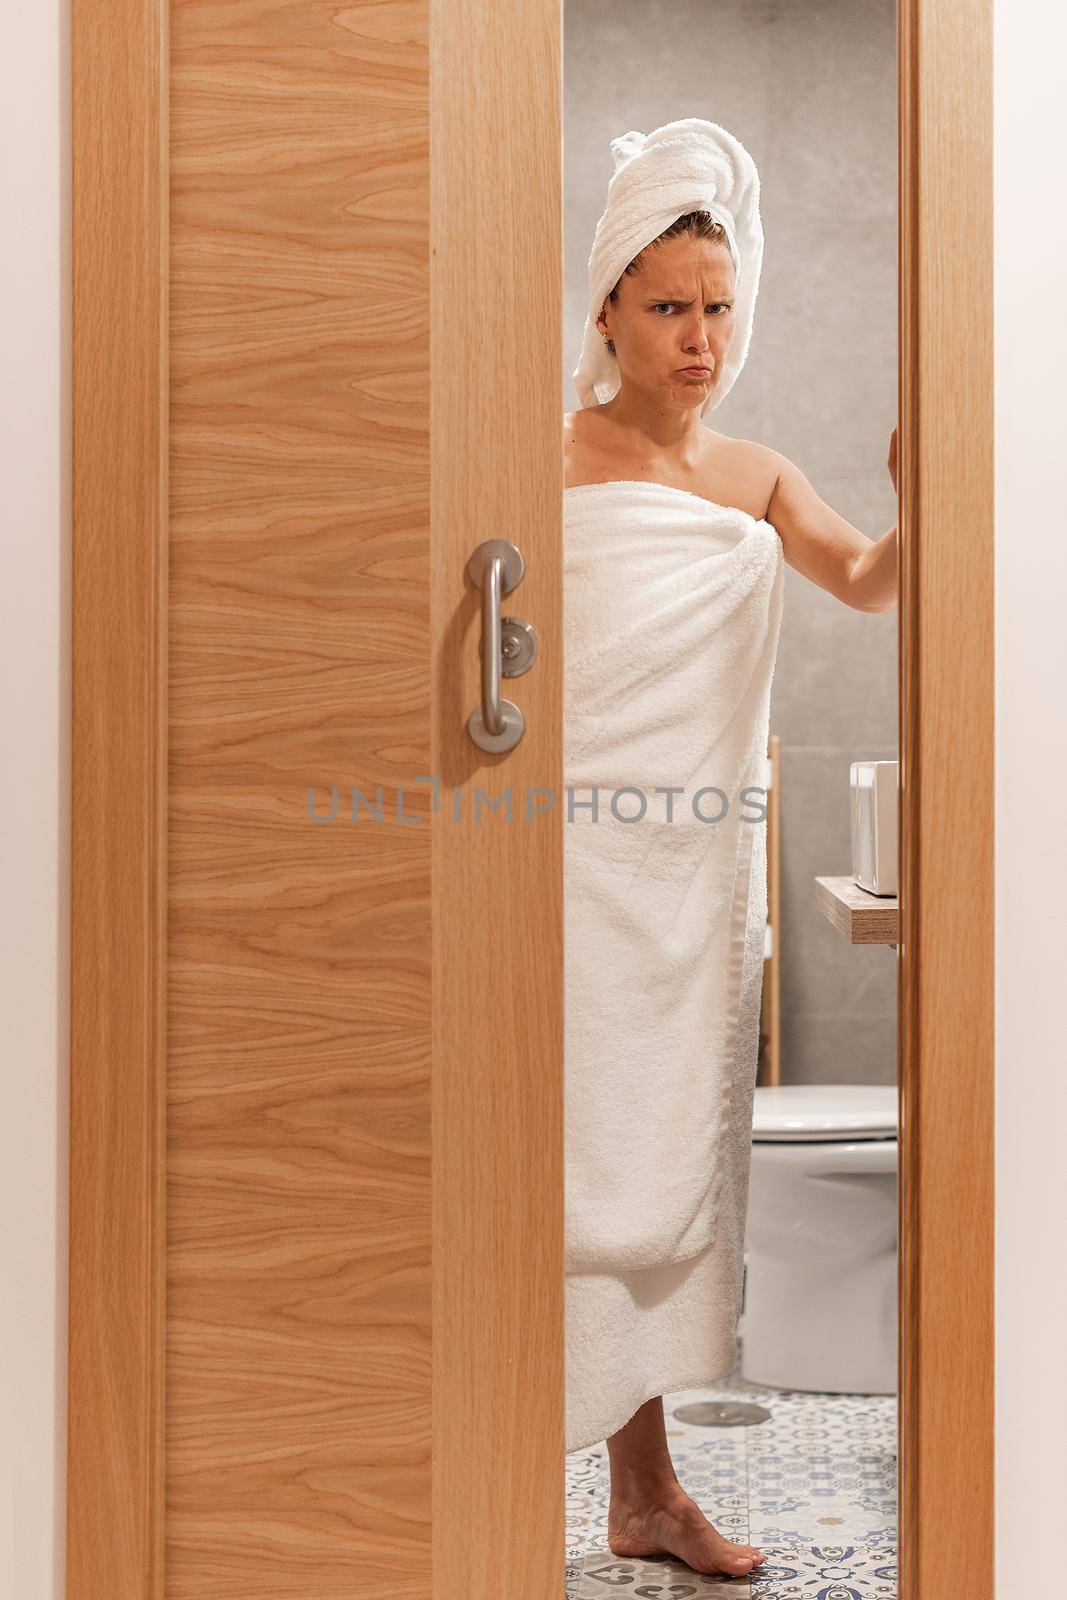 Woman annoyed at being spied on closes bathroom door by ivanmoreno